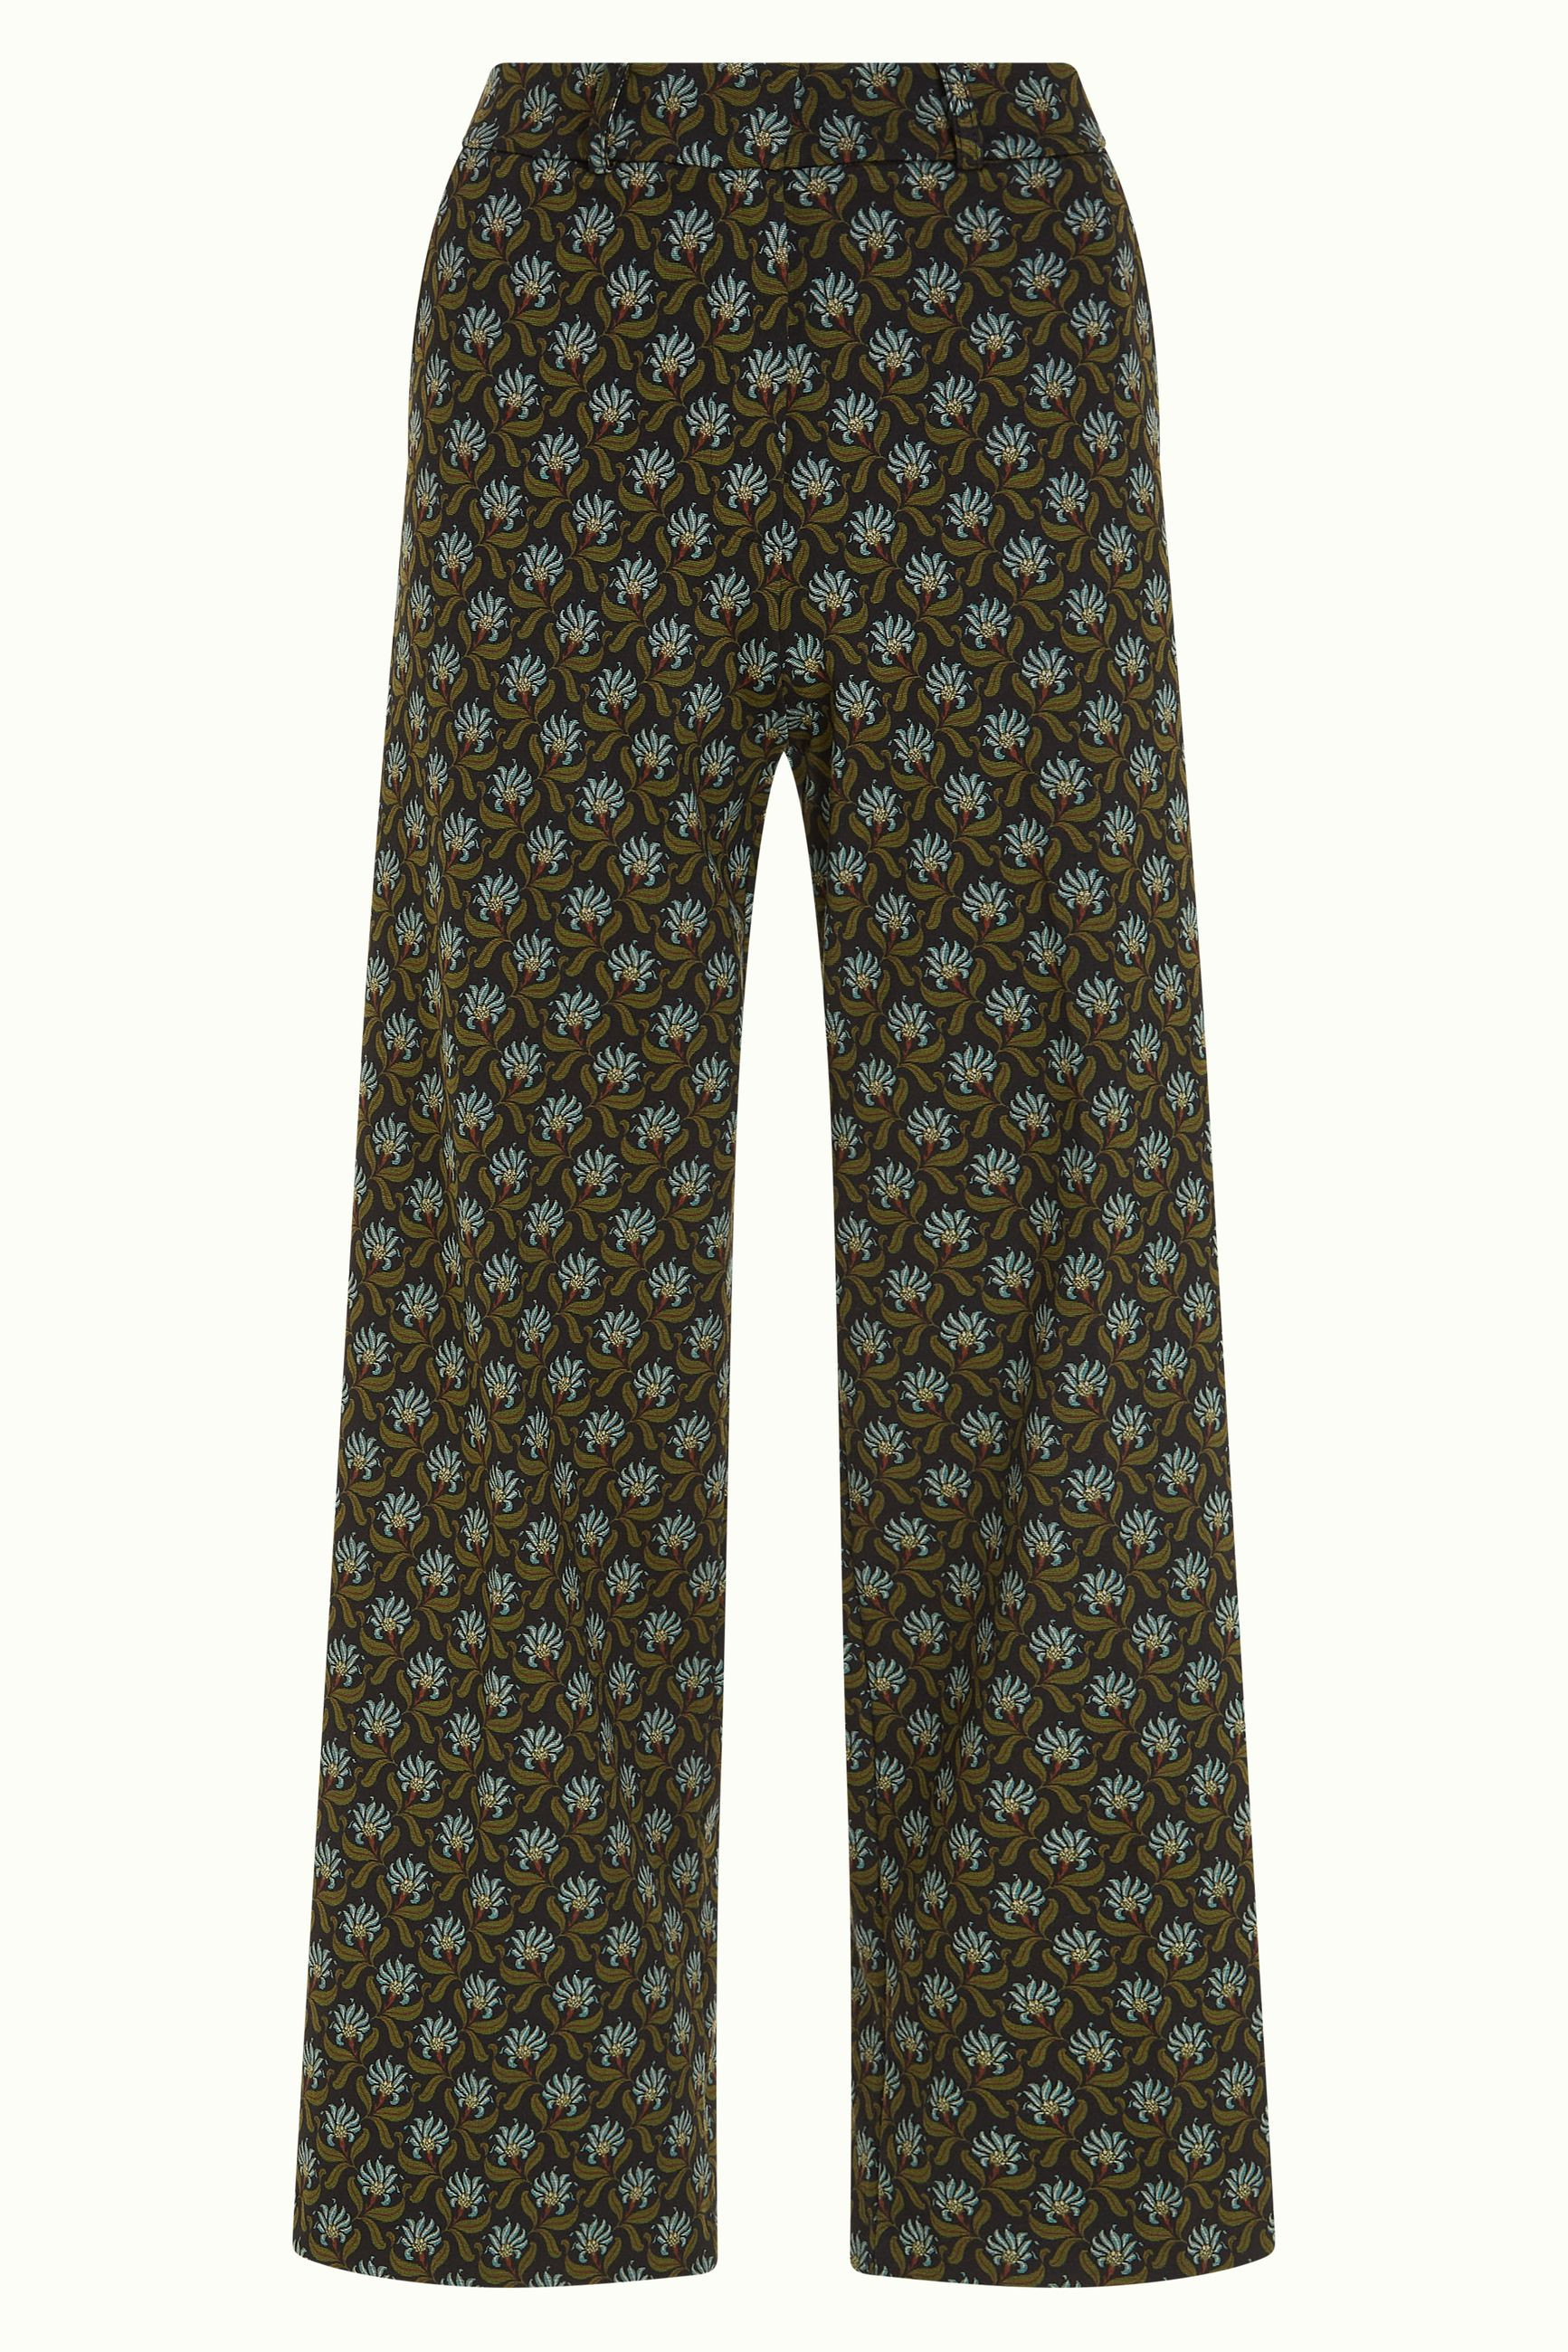 King Louie Federica Pants Miller, Hose, Farbe: Posey Green